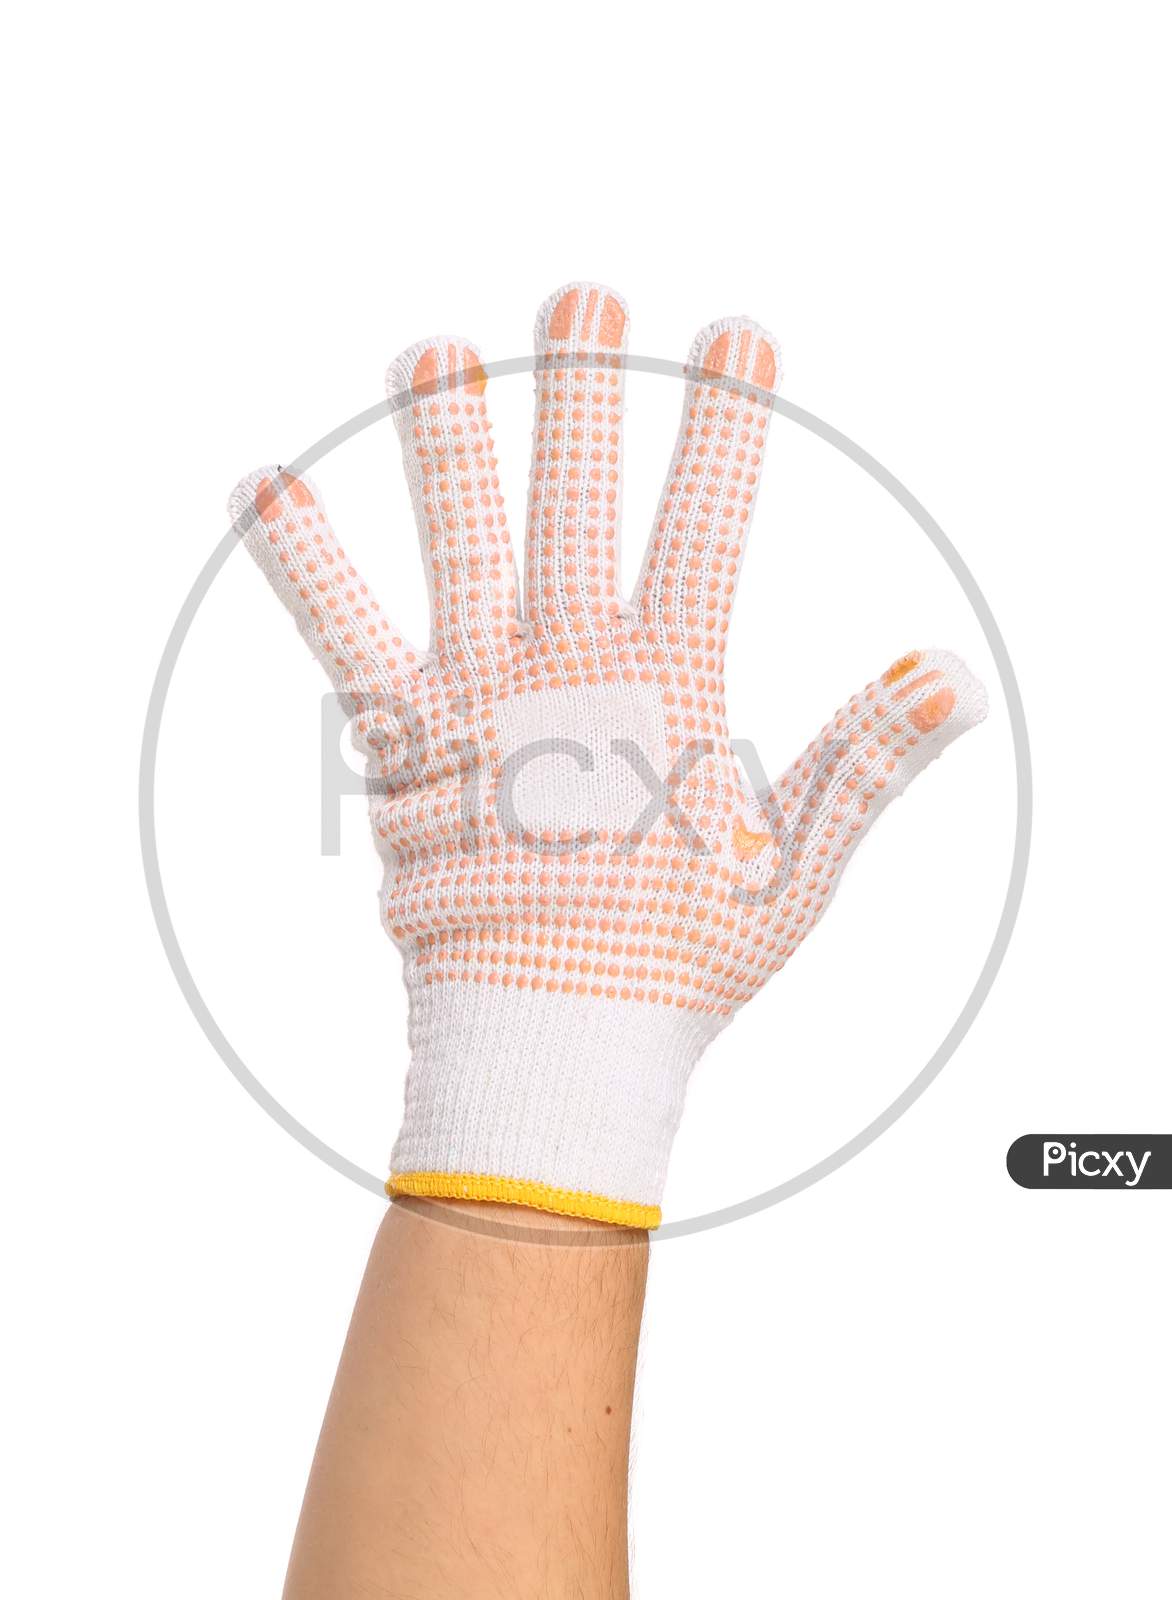 Hand In Glove Counts Five. Isolated On A White Background.